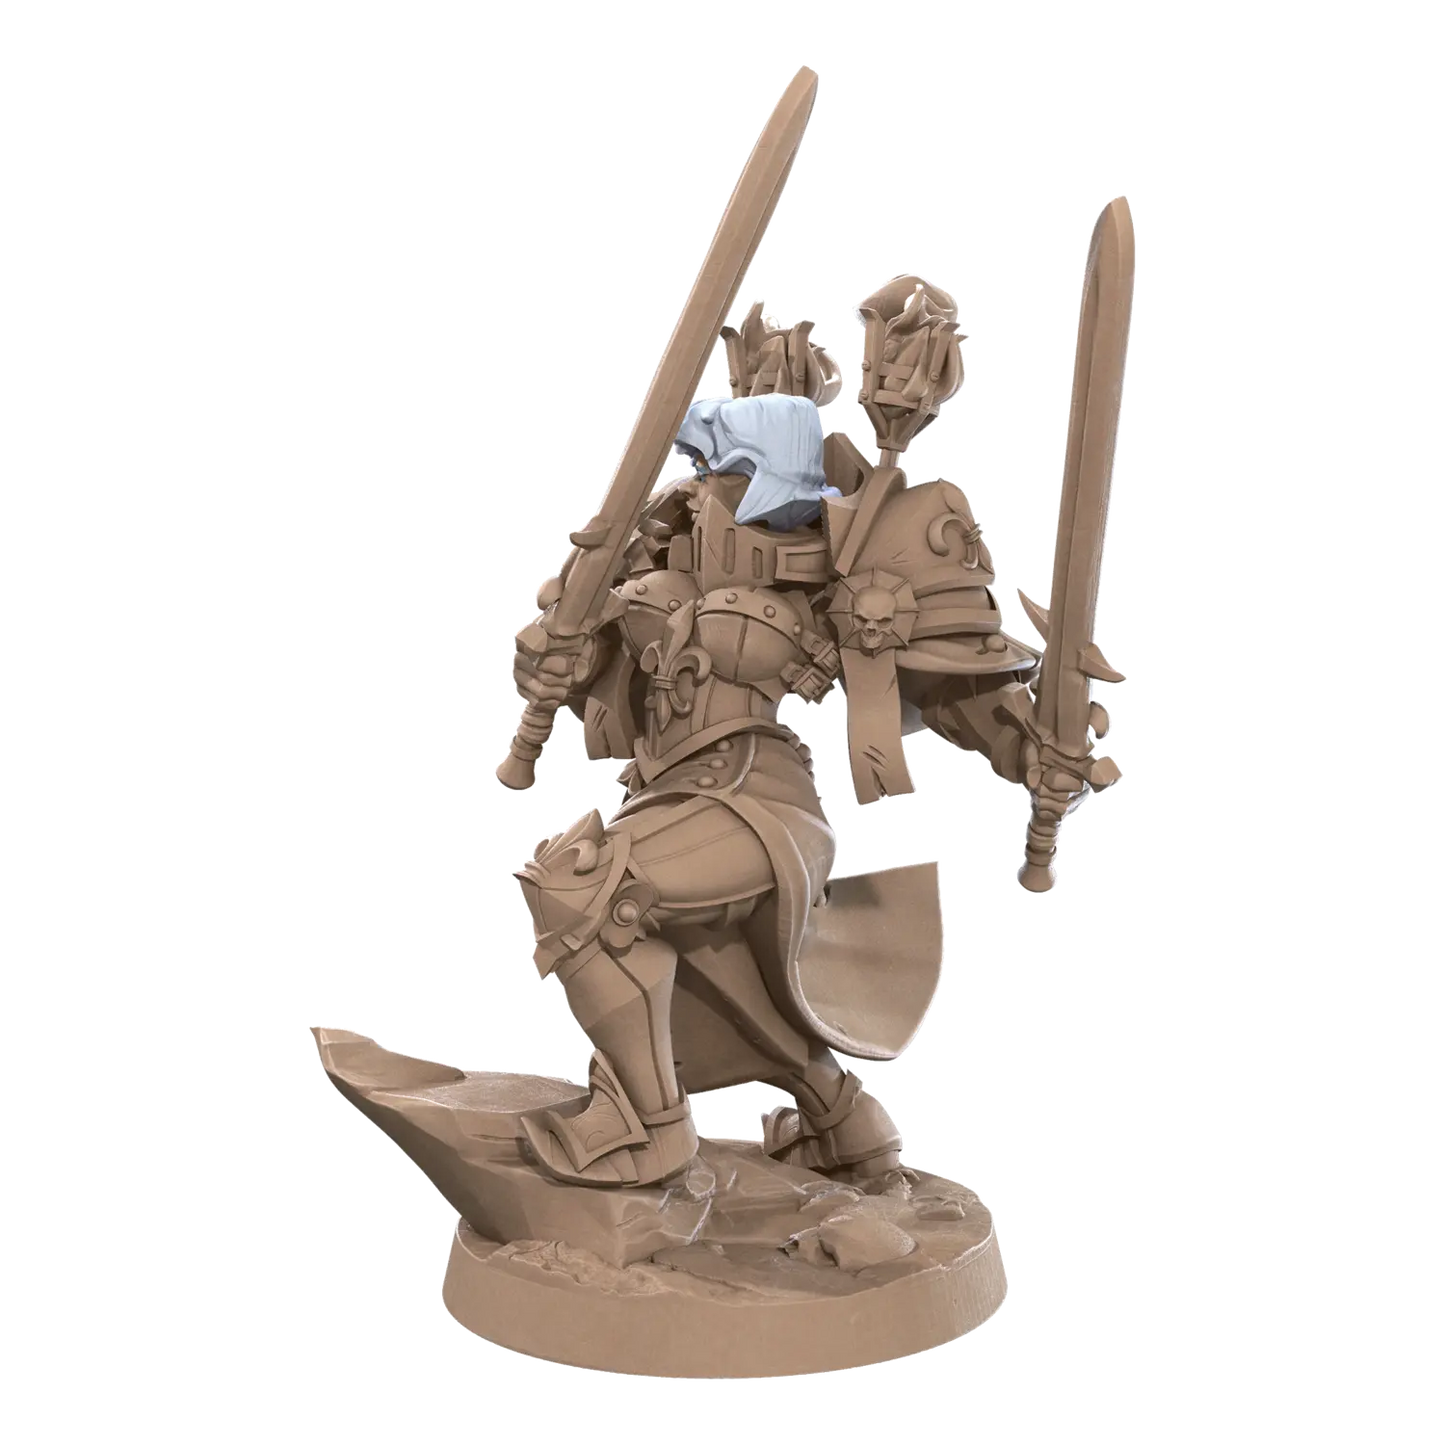 DnD Battle Sisters - Fighter - Human - Miniature - Paladin Cassandra 01 Battle Sisters - Fighter - Human - Miniature - Paladin sold by DoubleHitShop